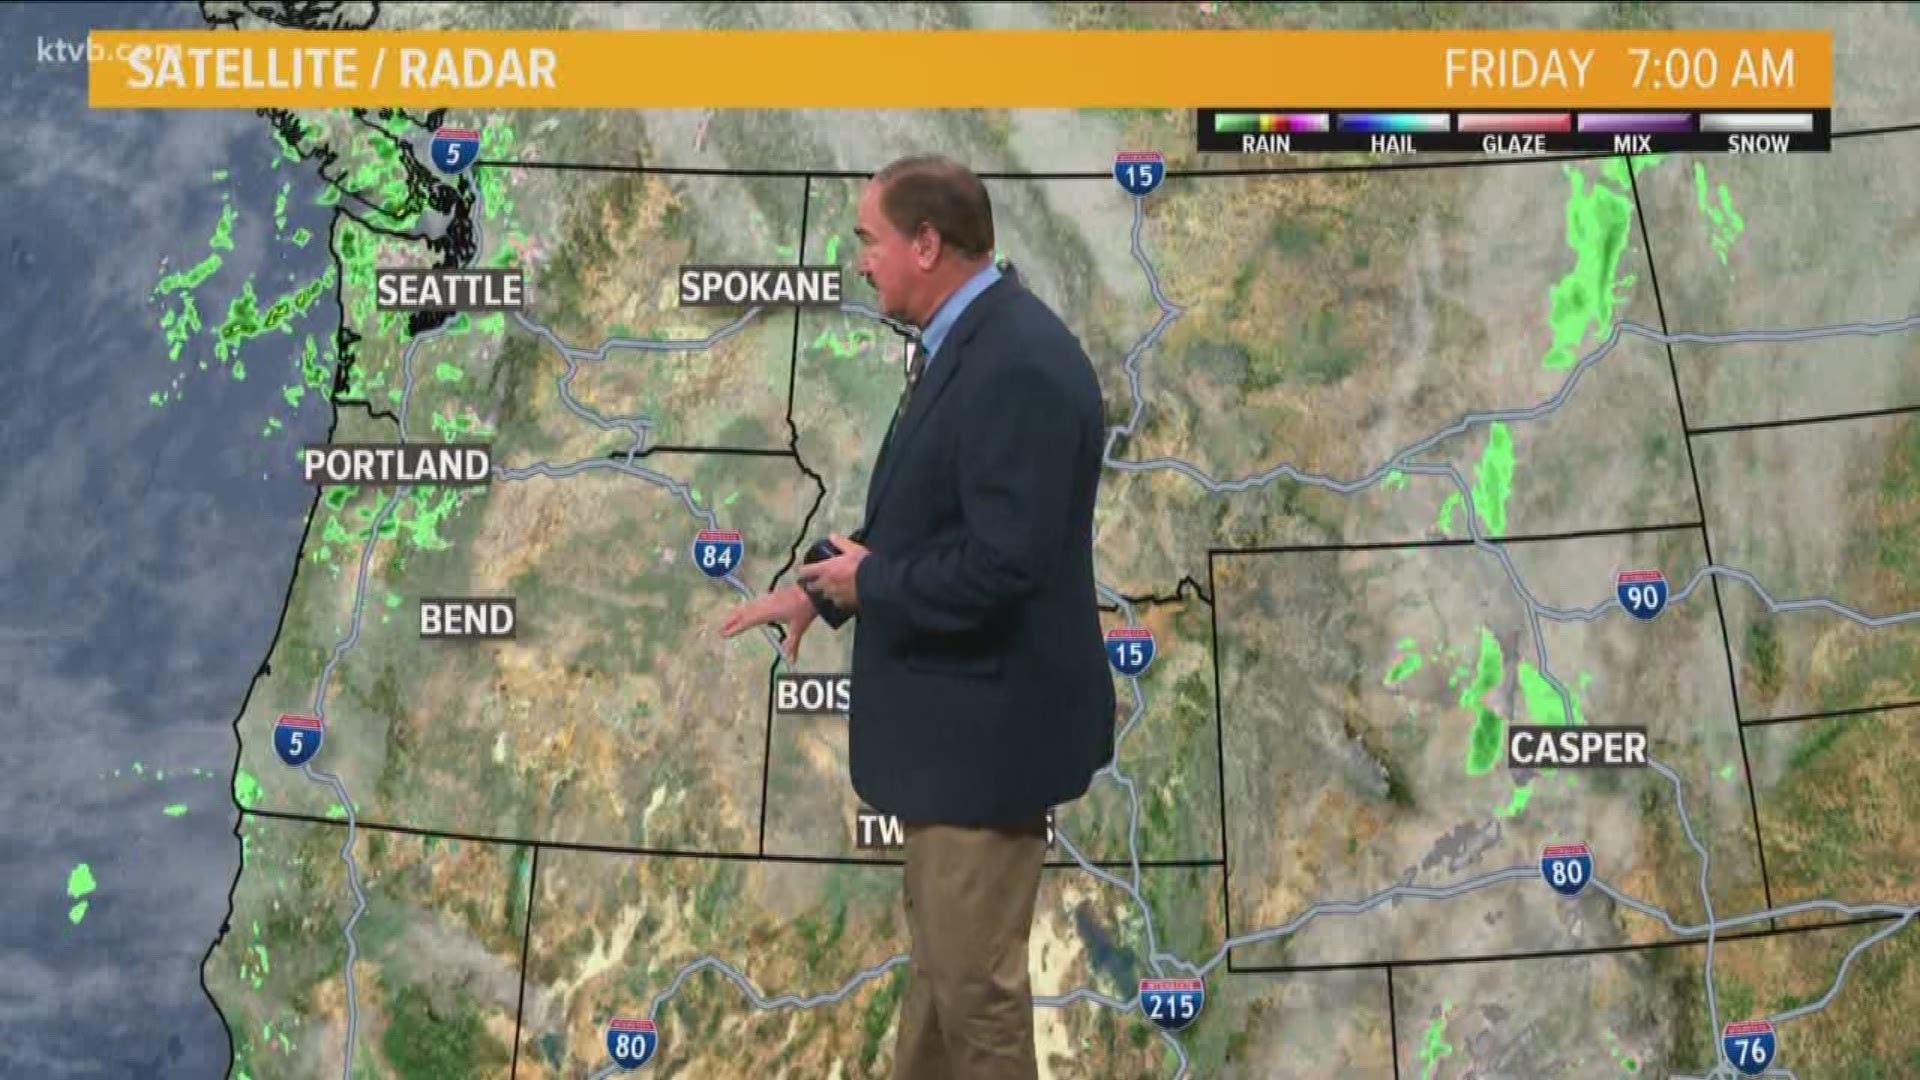 Friday weather in the Treasure Valley will be around the 50s for most of the day.